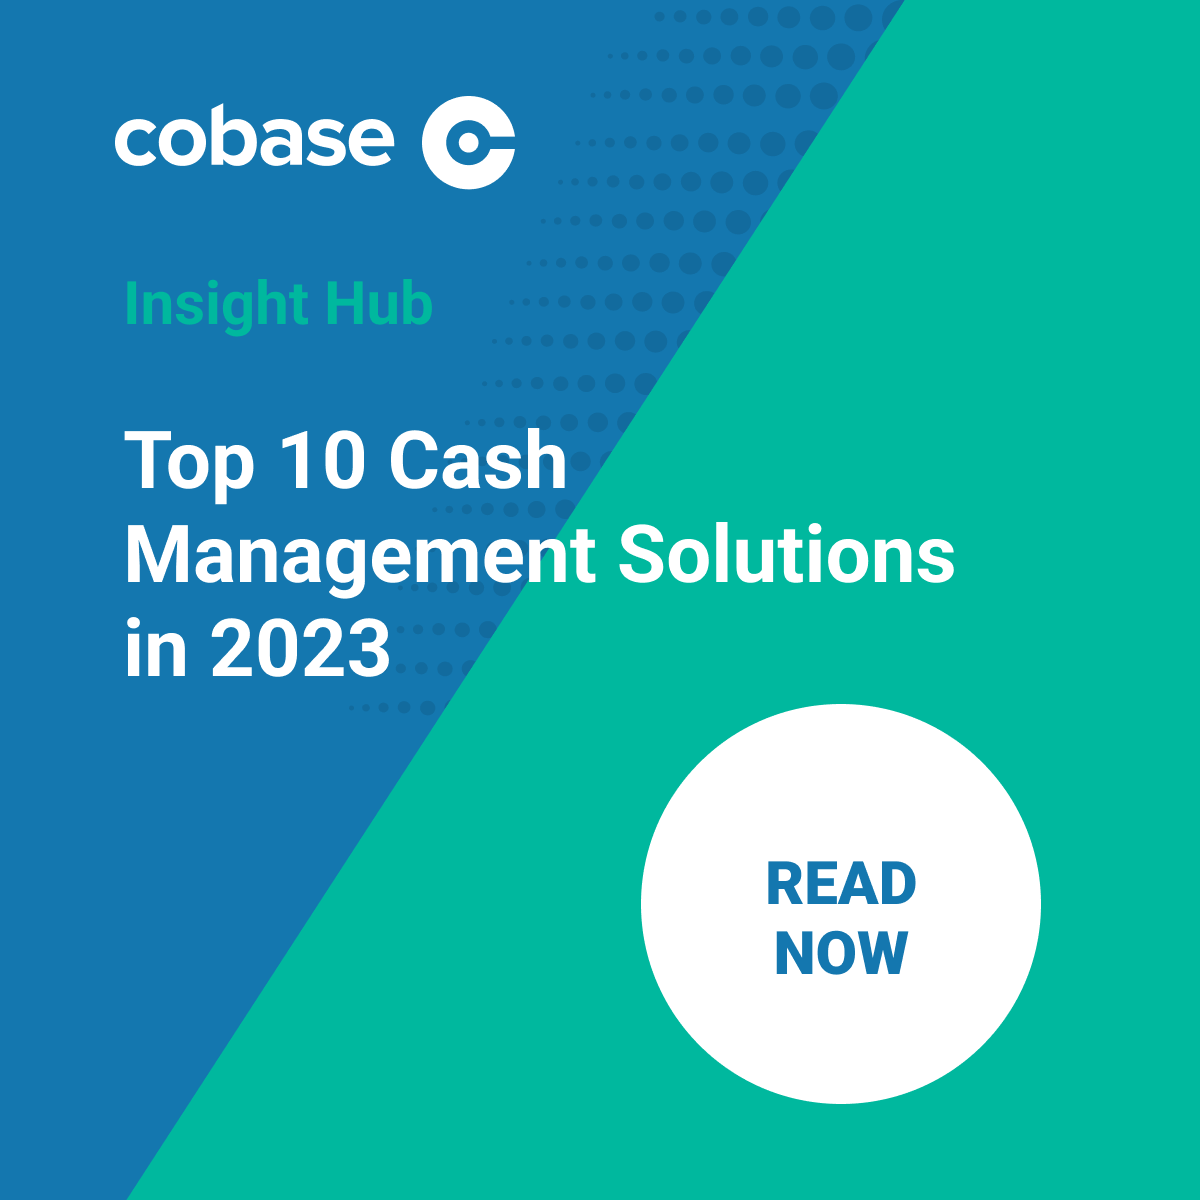 Top 10 Cash Management Solutions in 2023